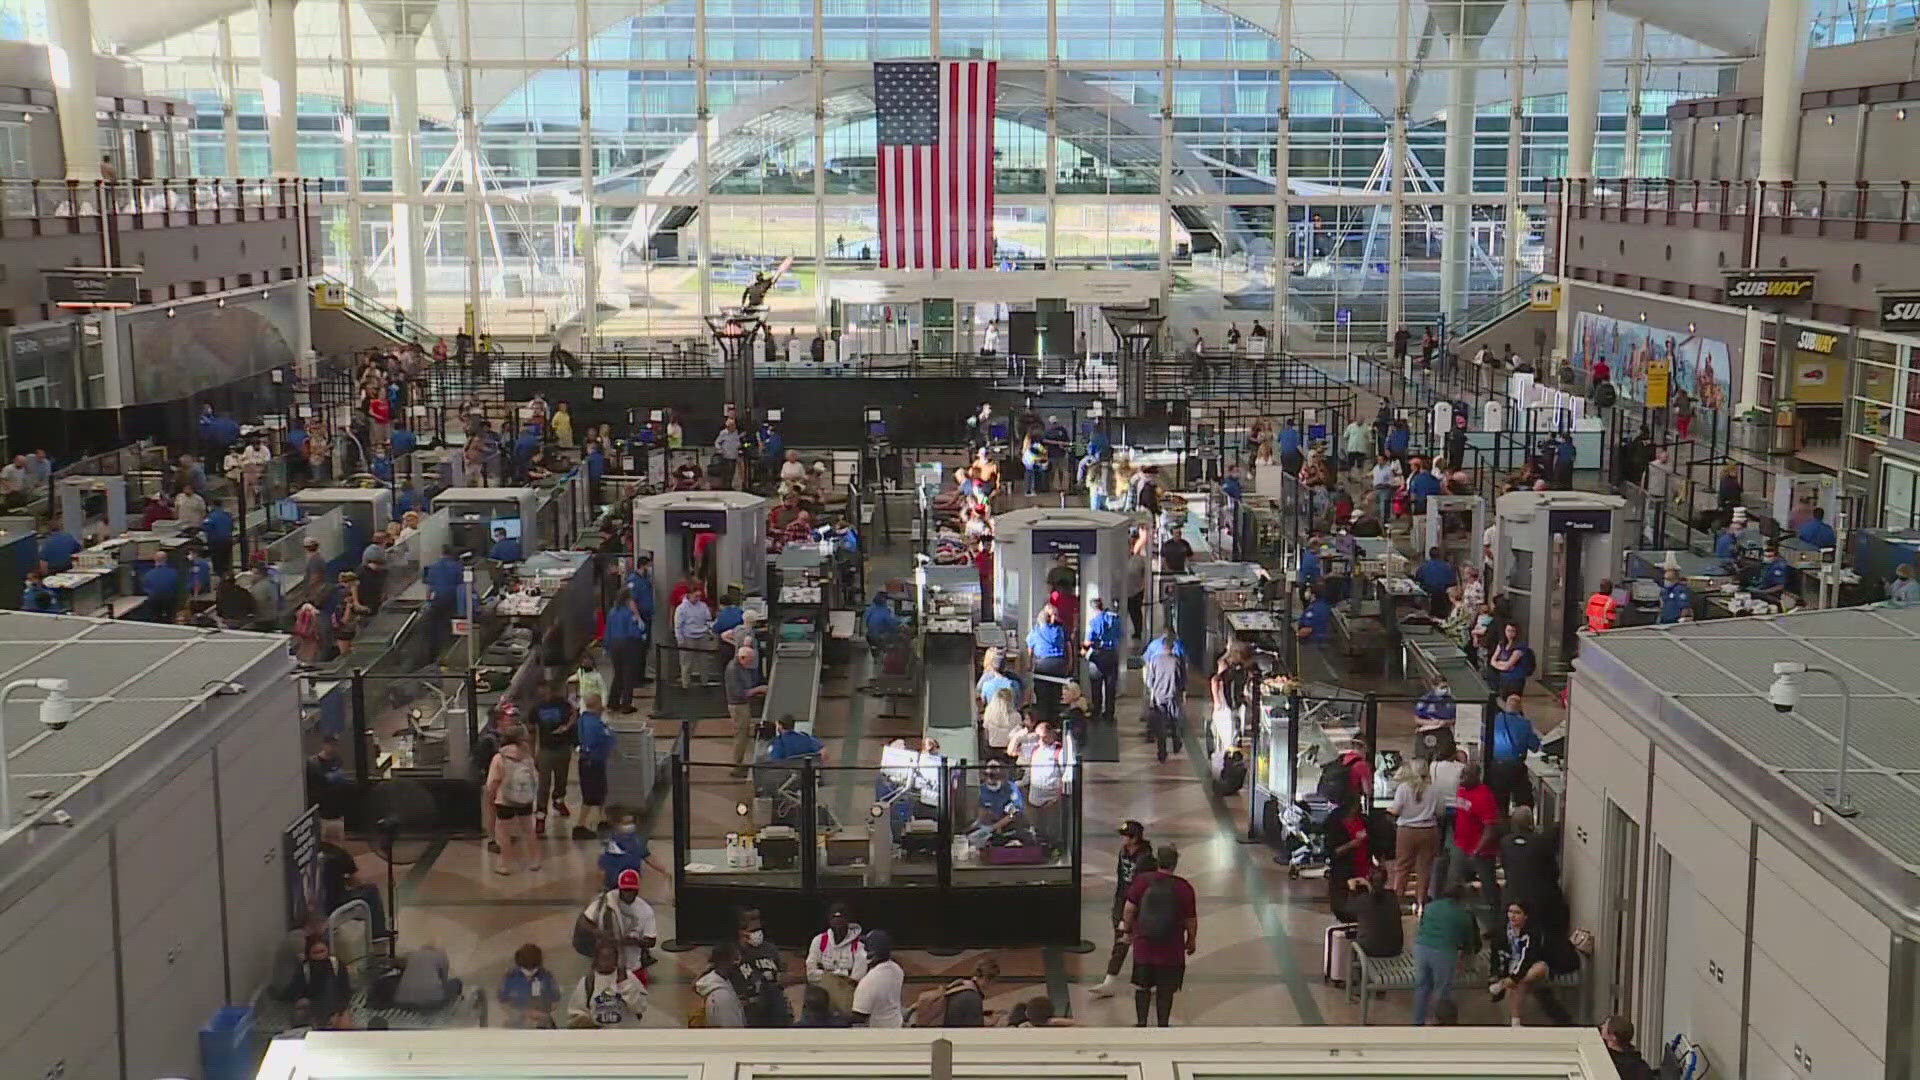 According to TSA officials, the change will make more staff available to have additional security lanes open during busier hours at the airport.